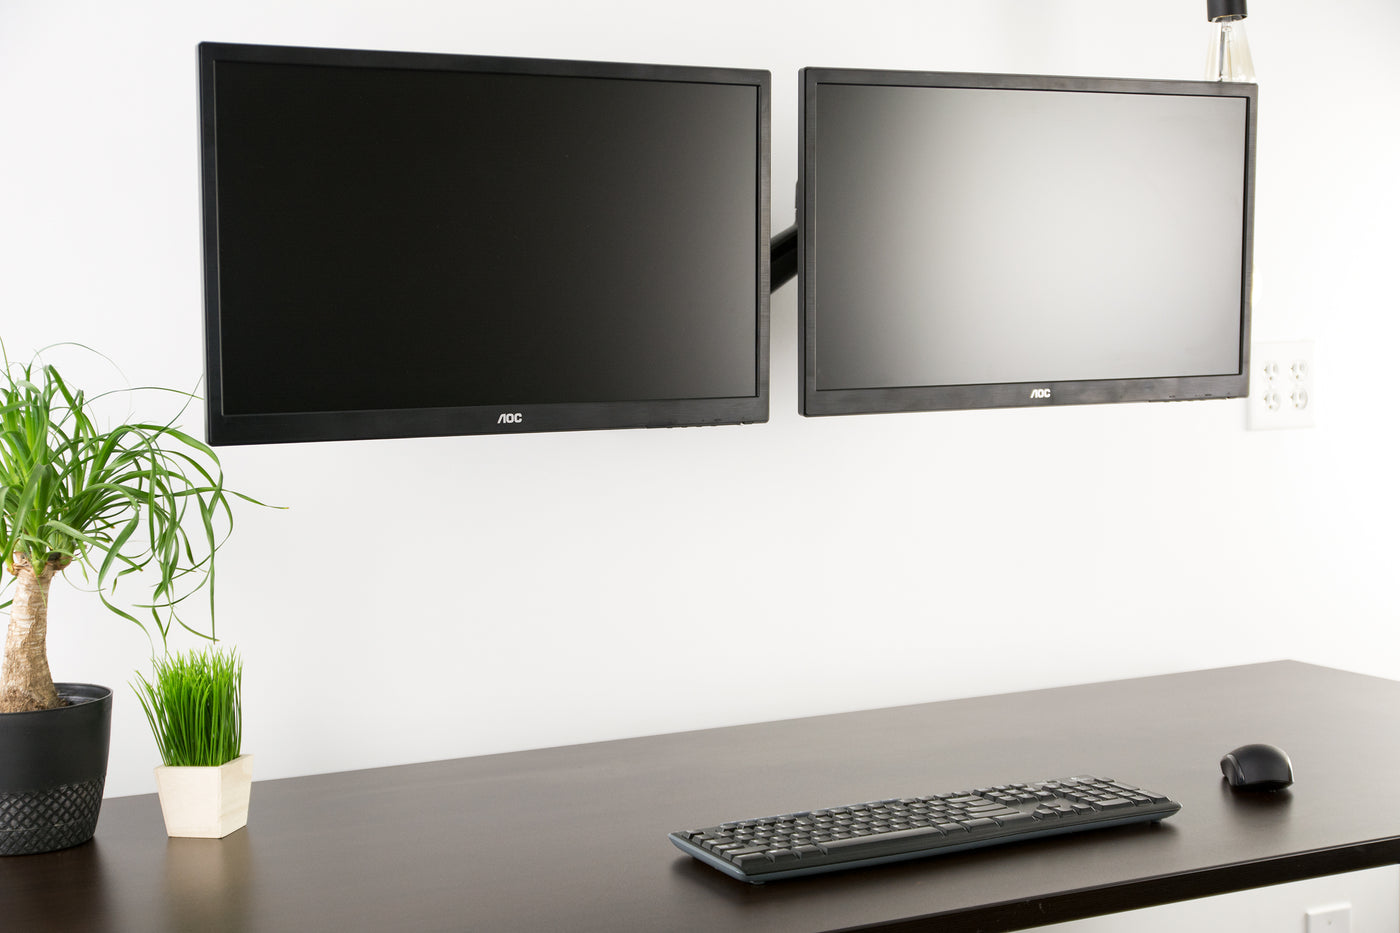 Dual pneumatic wall mount supporting two monitors.